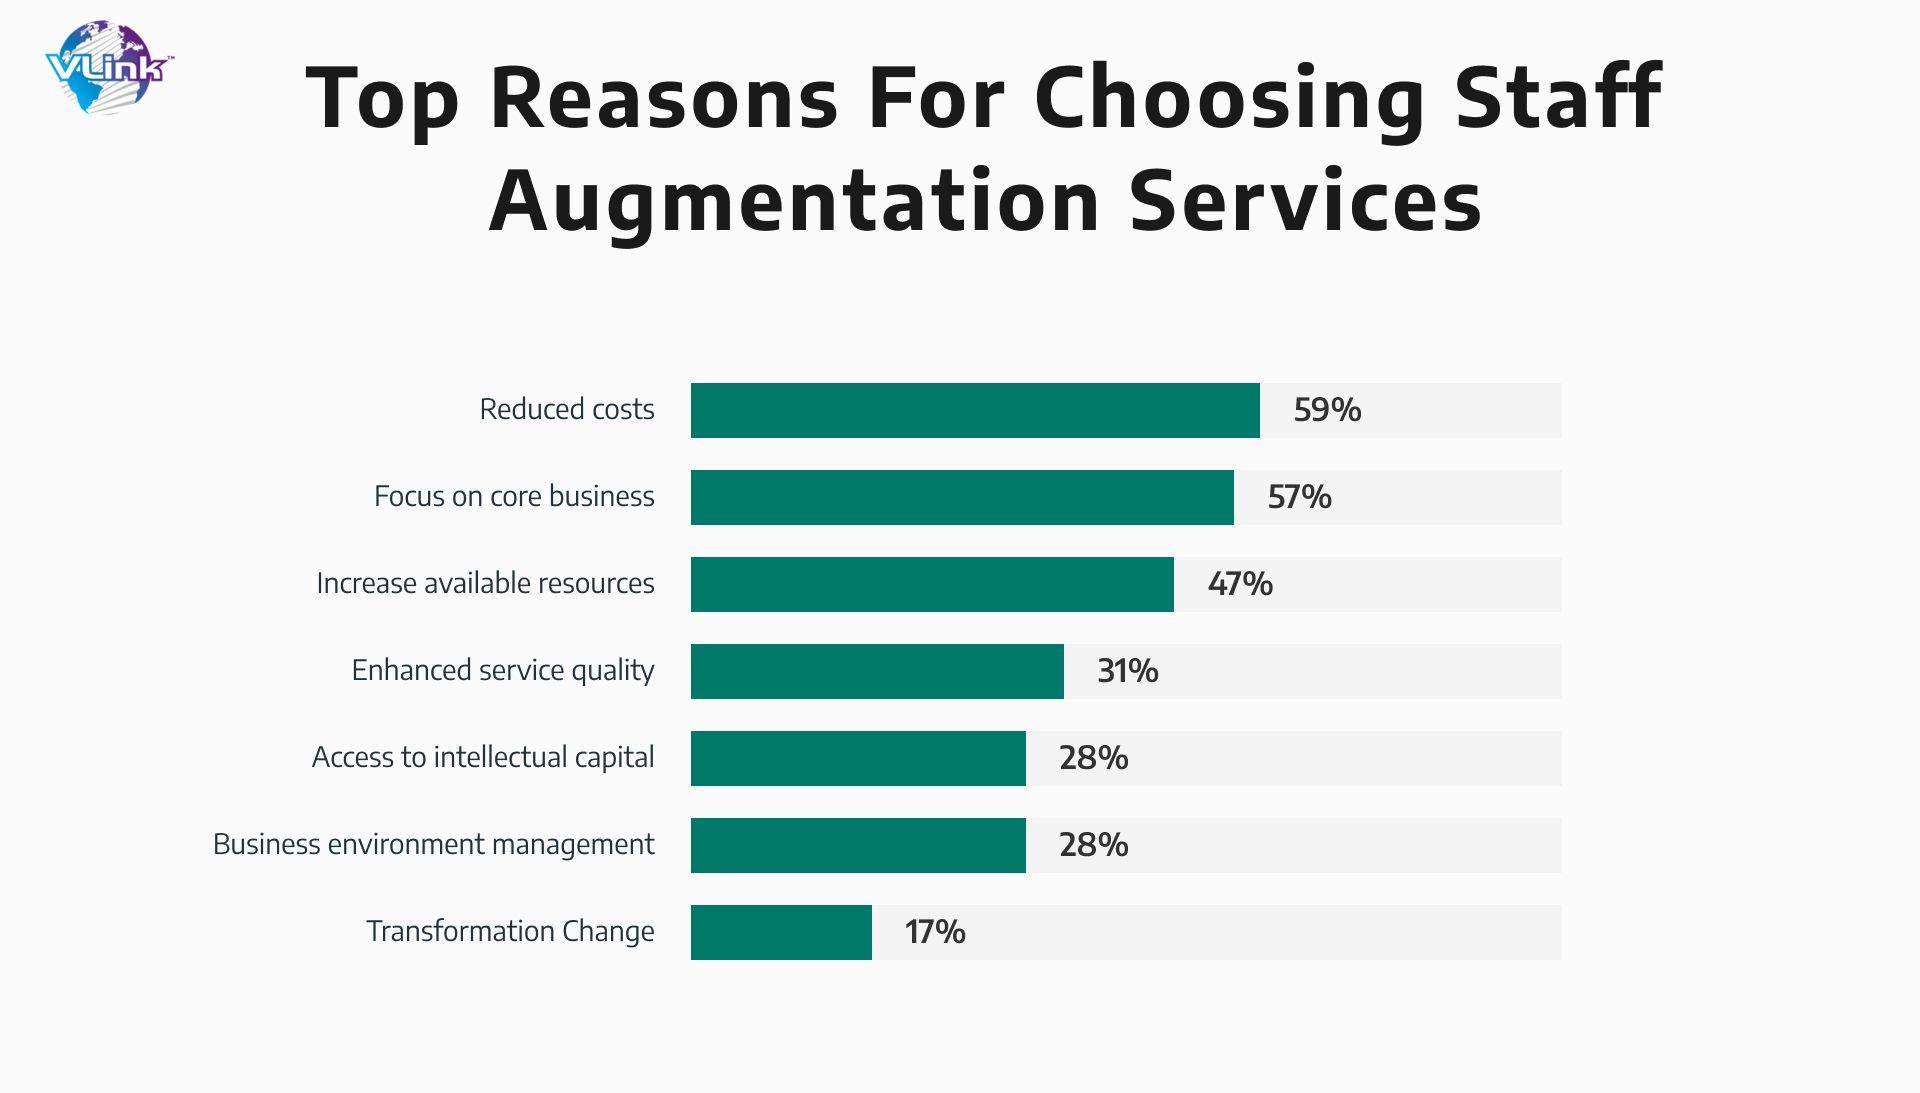 Top Reasons For Choosinf Staff Augmentation Services